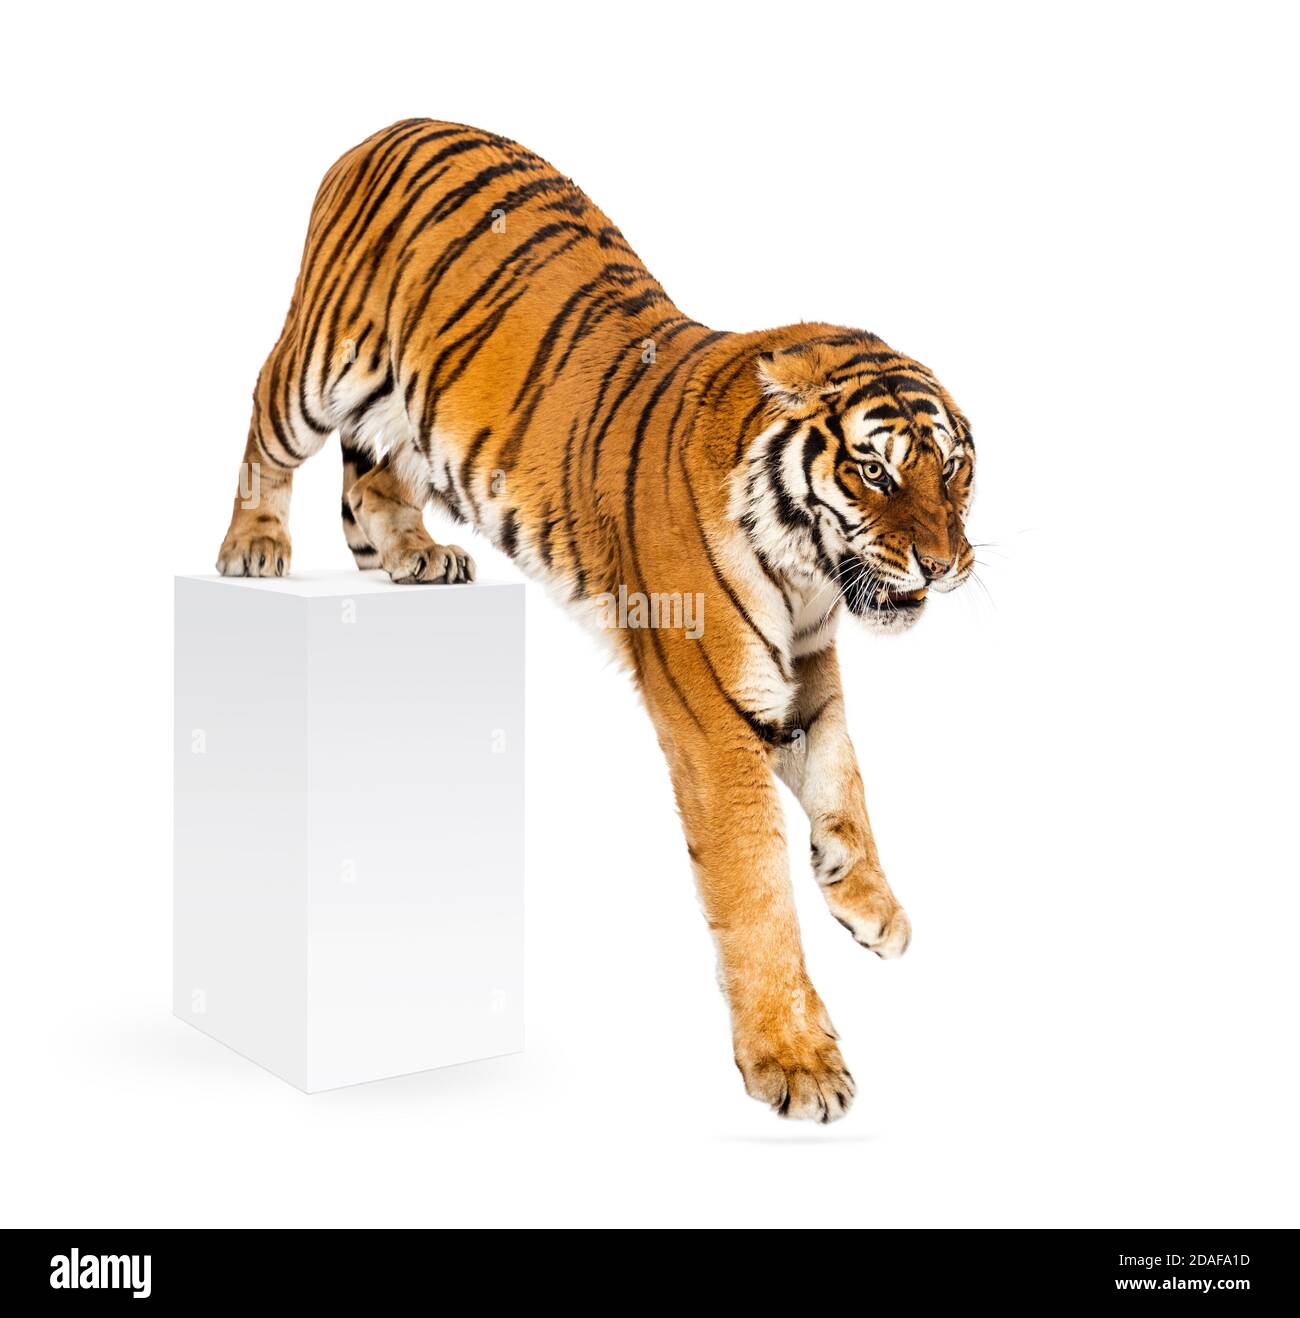 Tiger getting down a white box, isolated on white Stock Photo